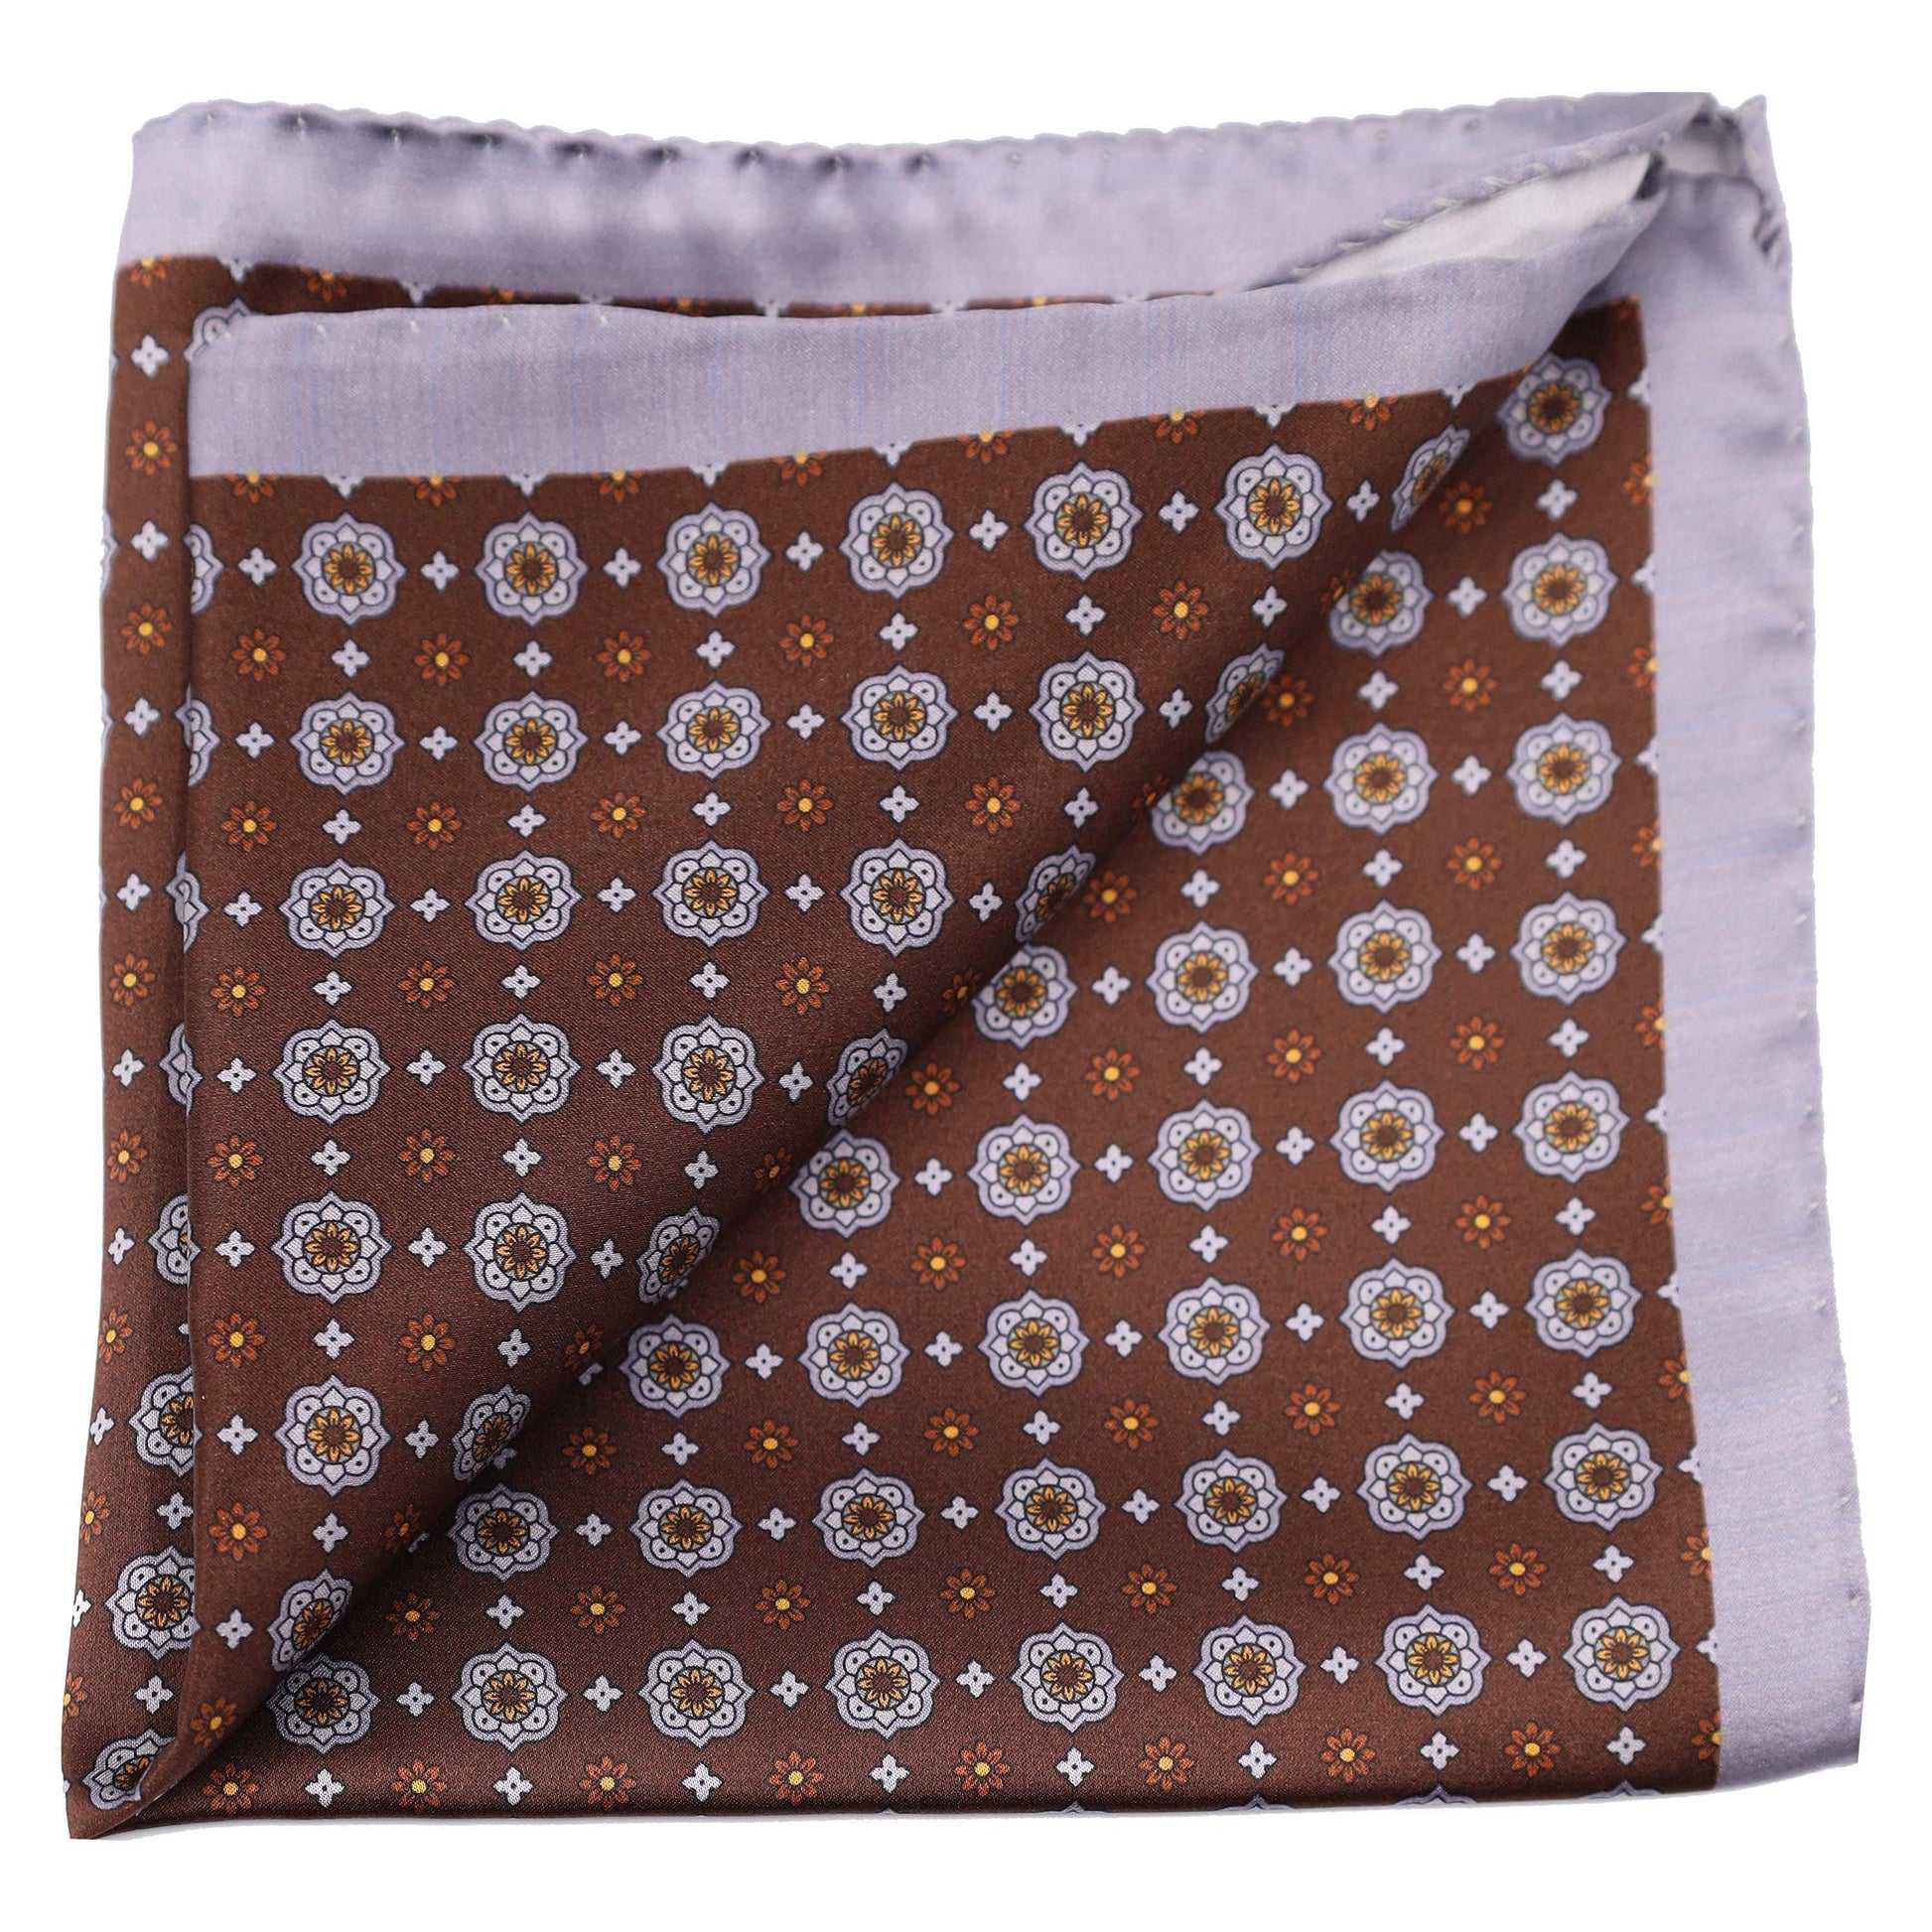 Sky Blue Medallions on Brown background silk pocket Square - Just White Shirts